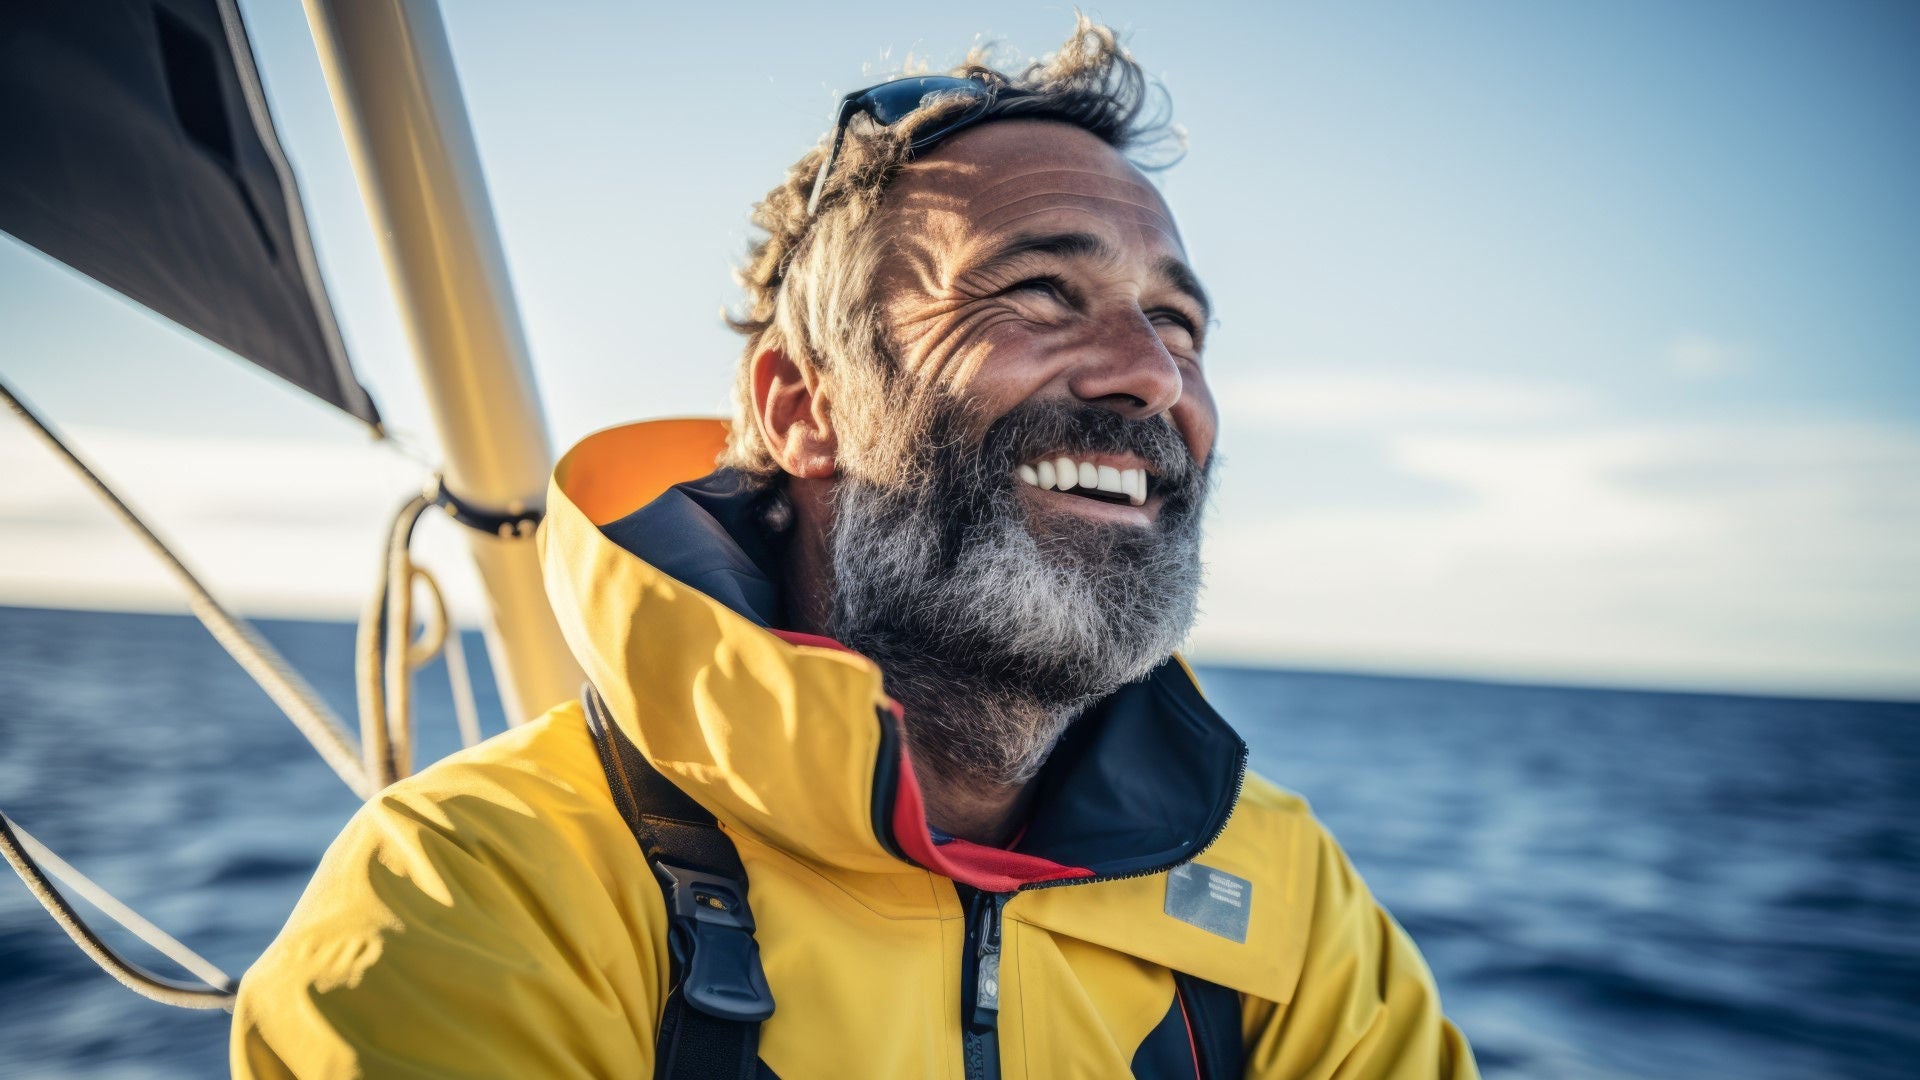 Smiling man on yacht